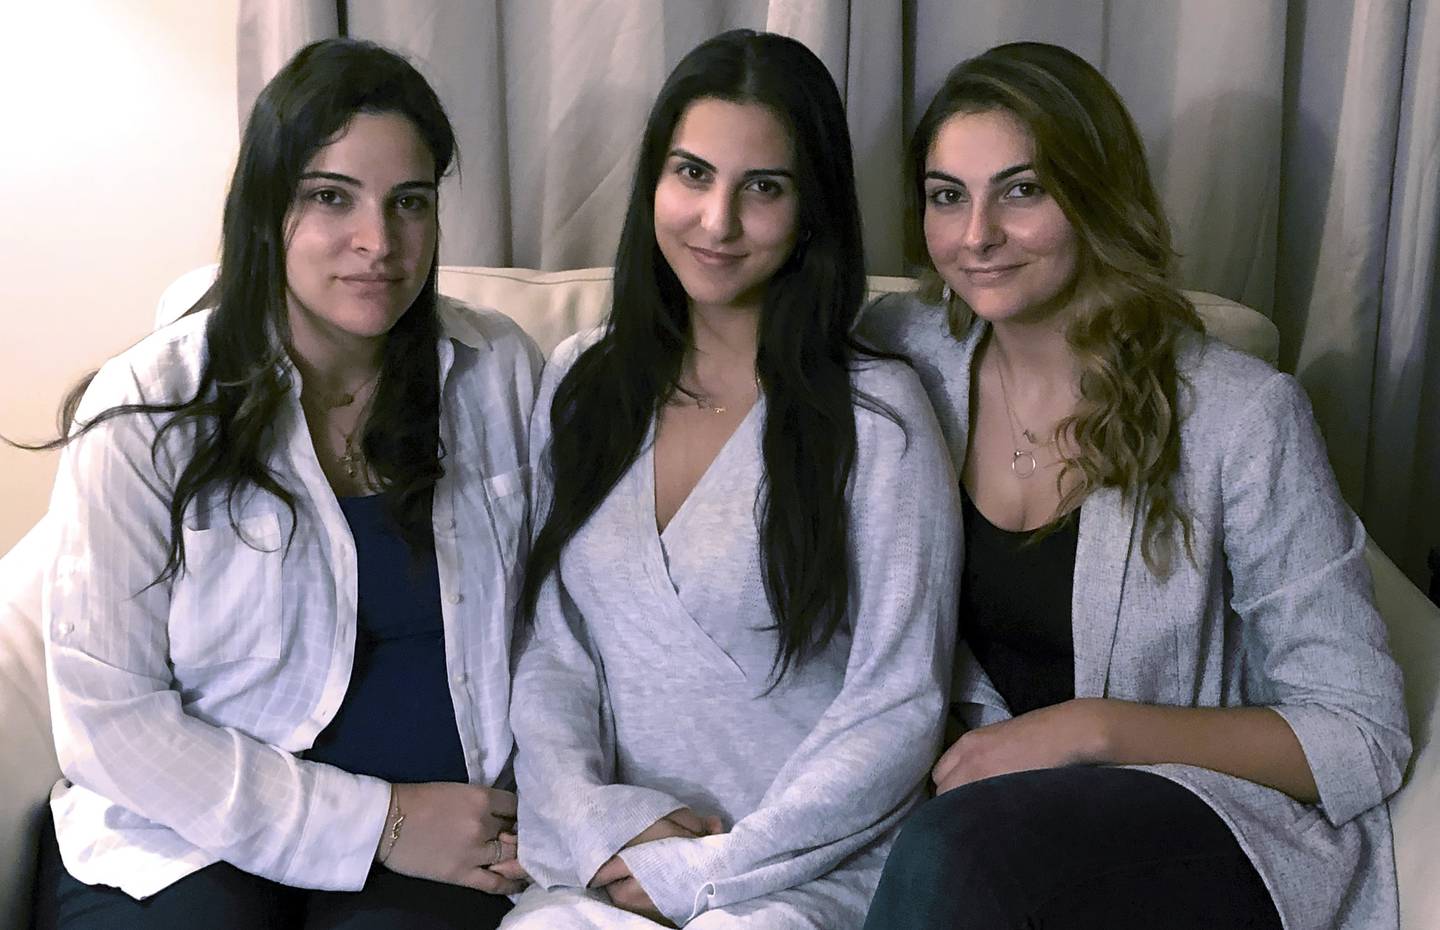 Amer Fakhoury's daughters, Guila, Macy, and Zoya Fakhoury, gather in Salem, New Hampshire. He was accused of torturing and killing inmates at a former prison where his family says he had worked as a clerk. AP